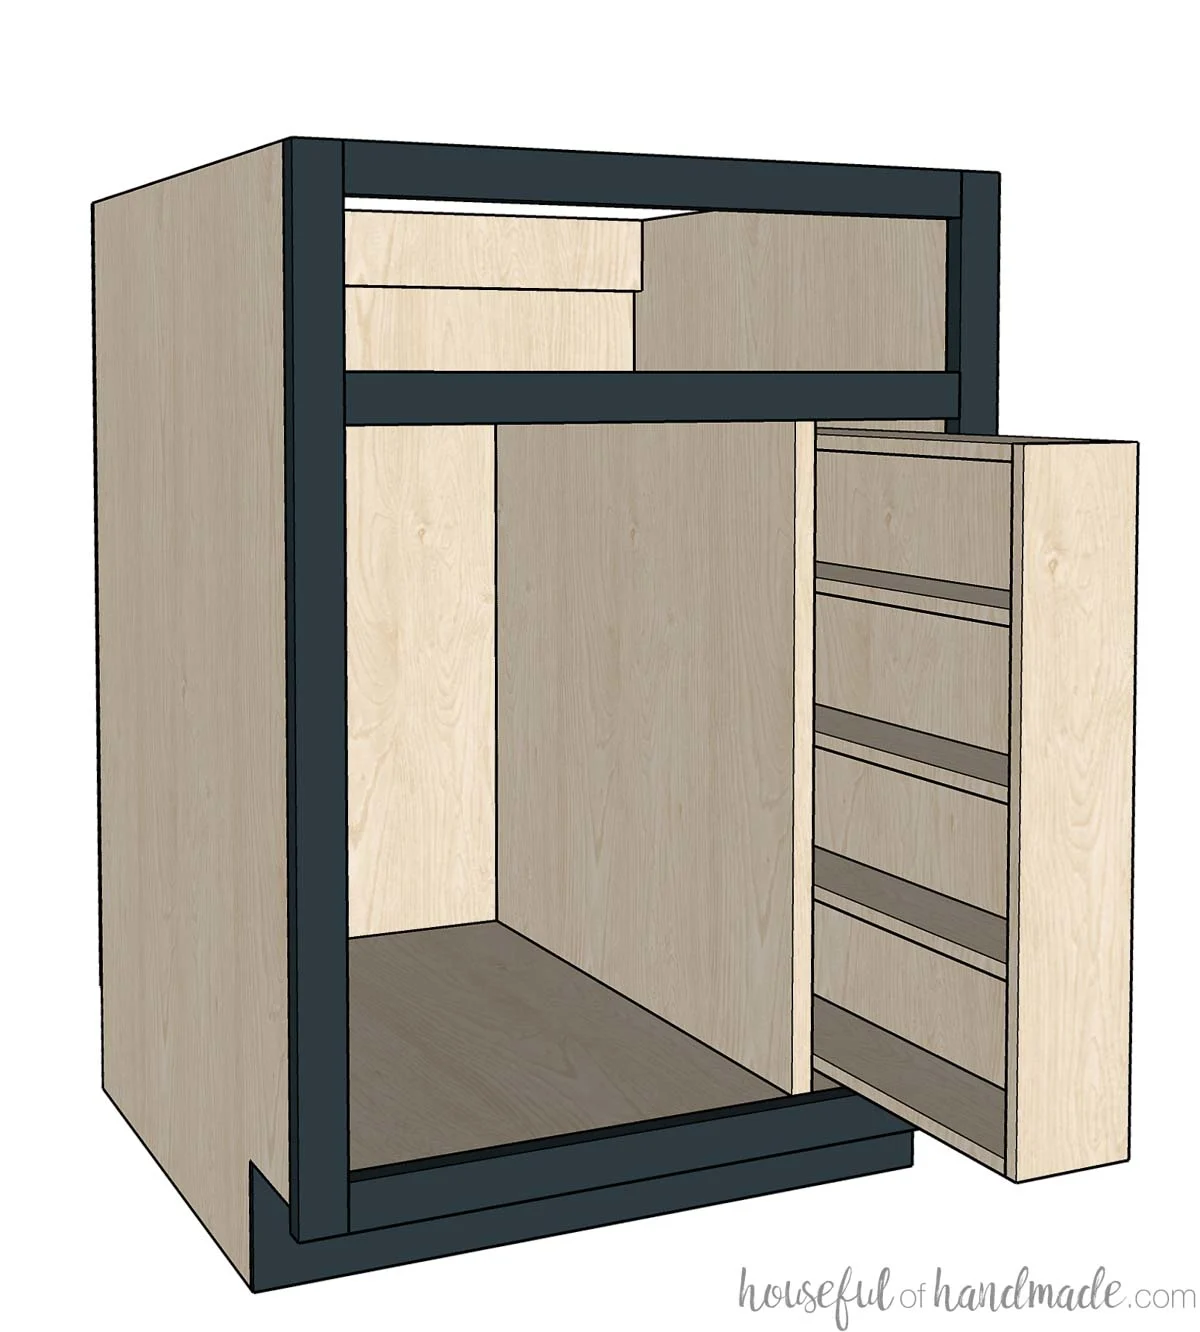 Drawing of large base cabinet with retrofit pull out spice cabinet on one side. 